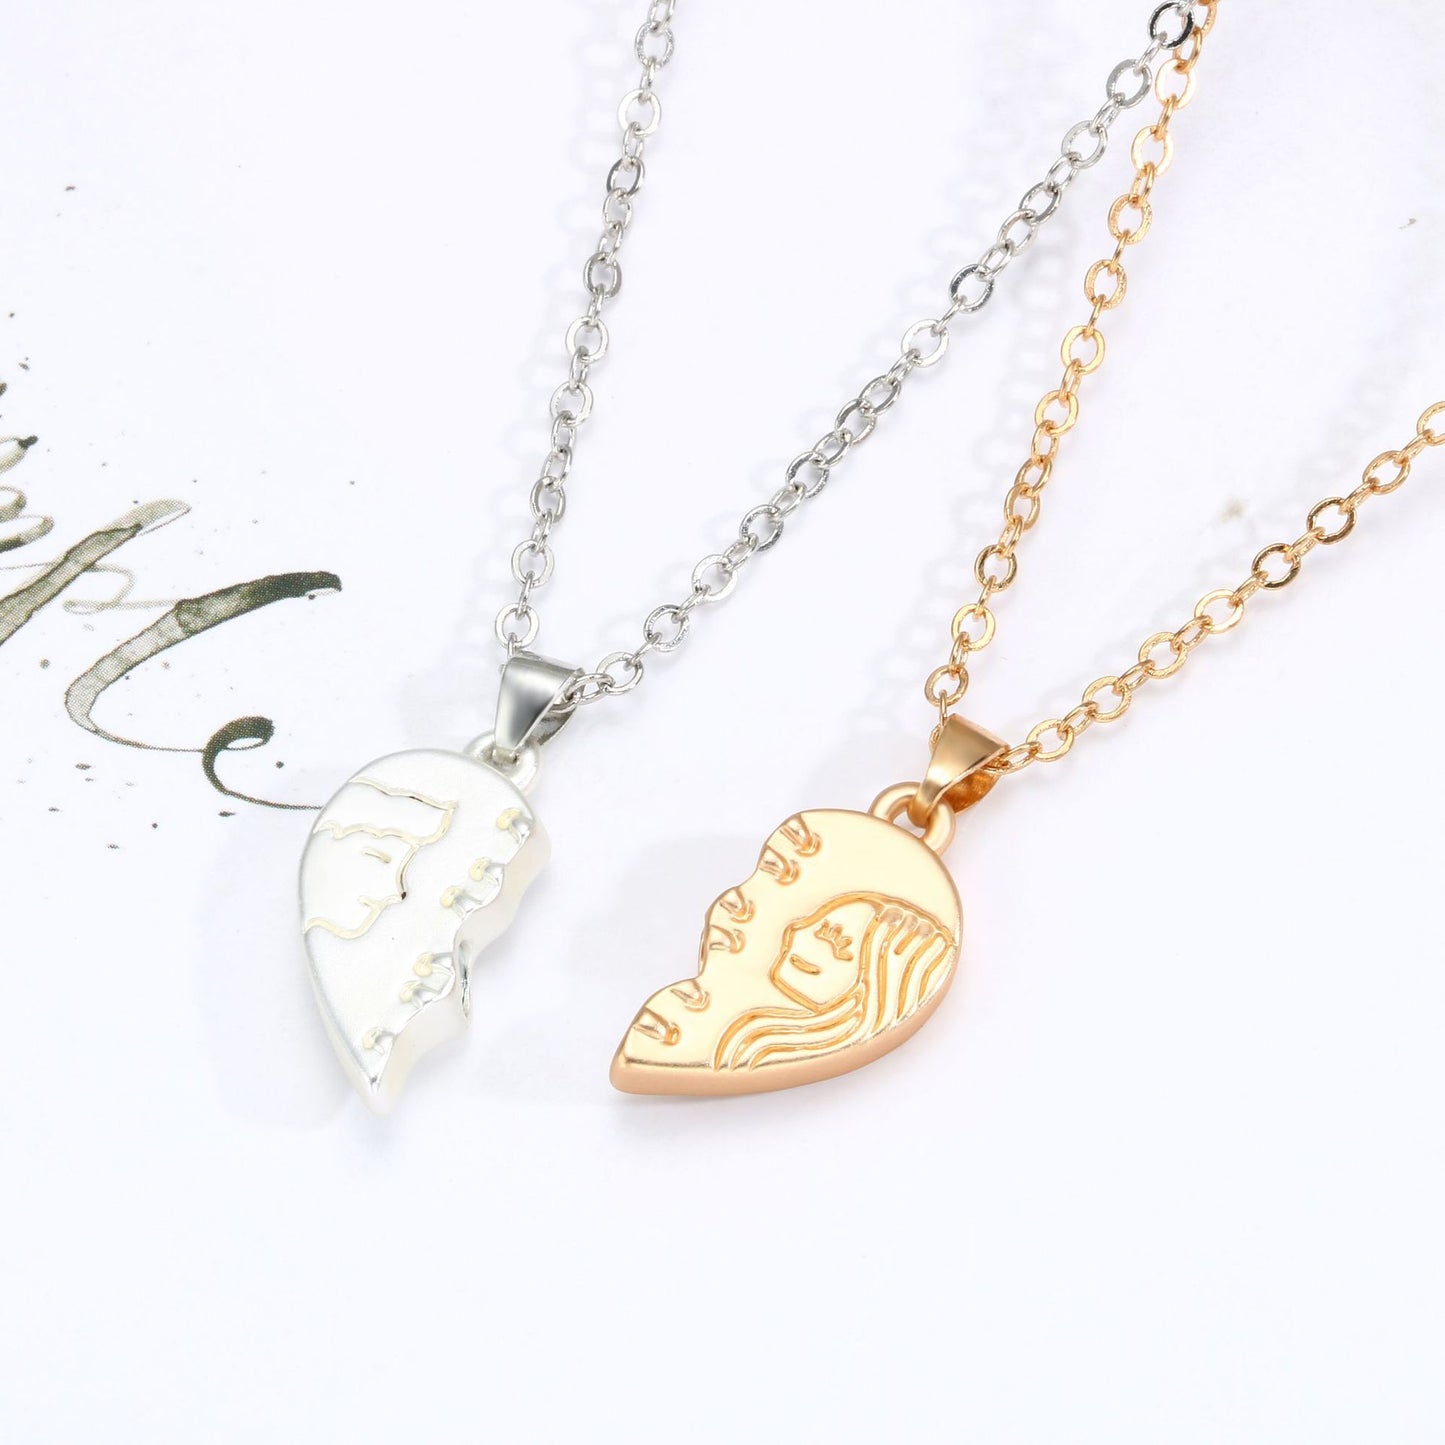 Engraved Magnetic Couples Necklaces Gift Set